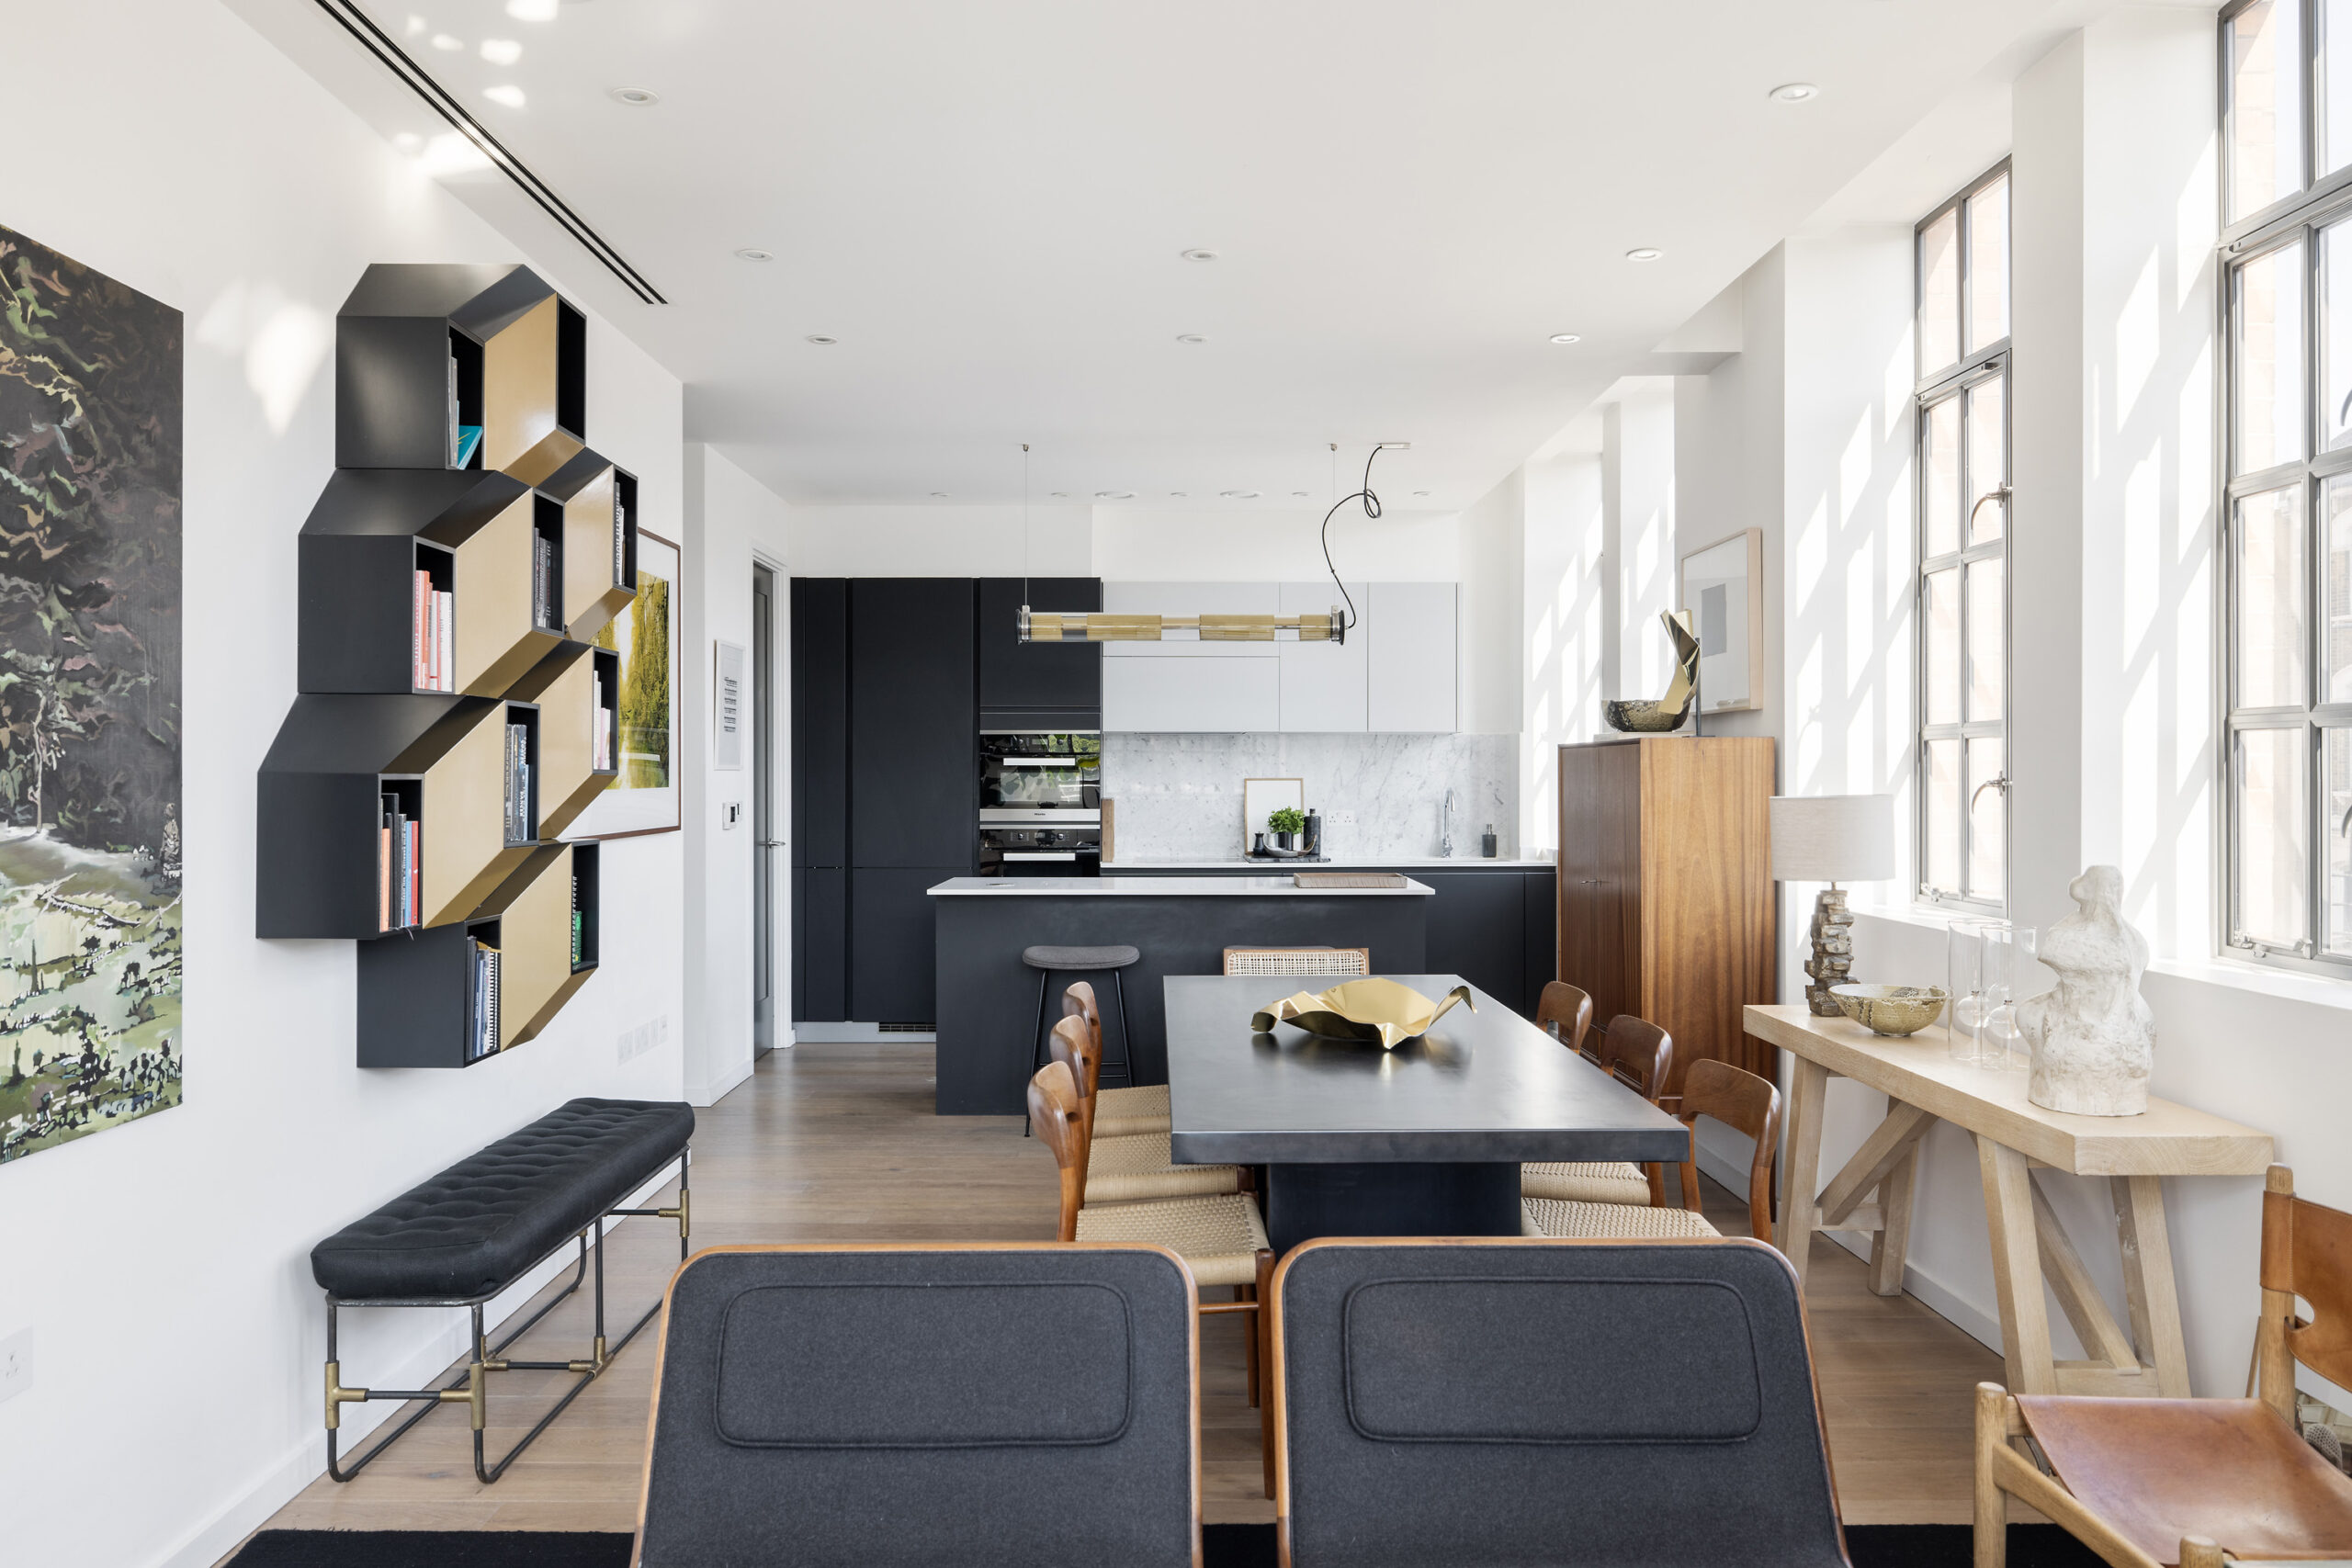 Contemporary kitchen and dining room of a luxurious loft-style apartment for rent in Highgate